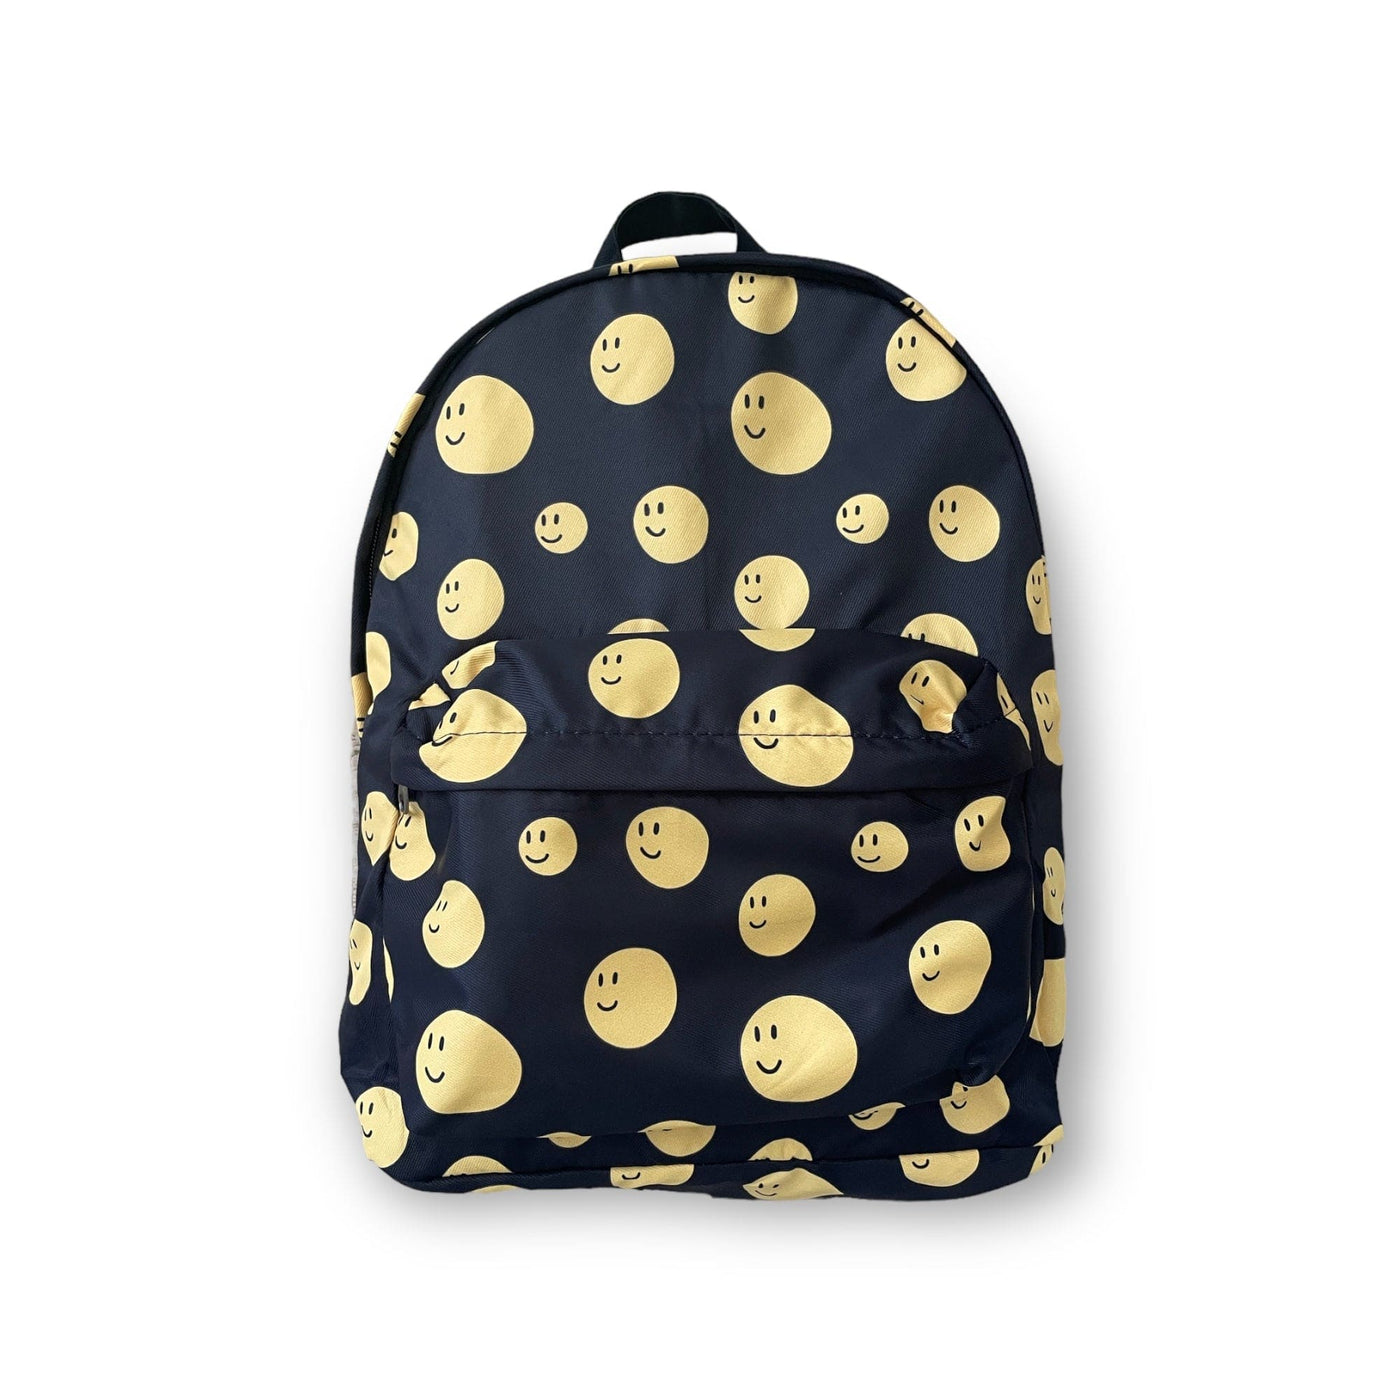 Best Day Ever Kids Bags Cool Kid Backpack - All Smiles buy online boutique kids clothing